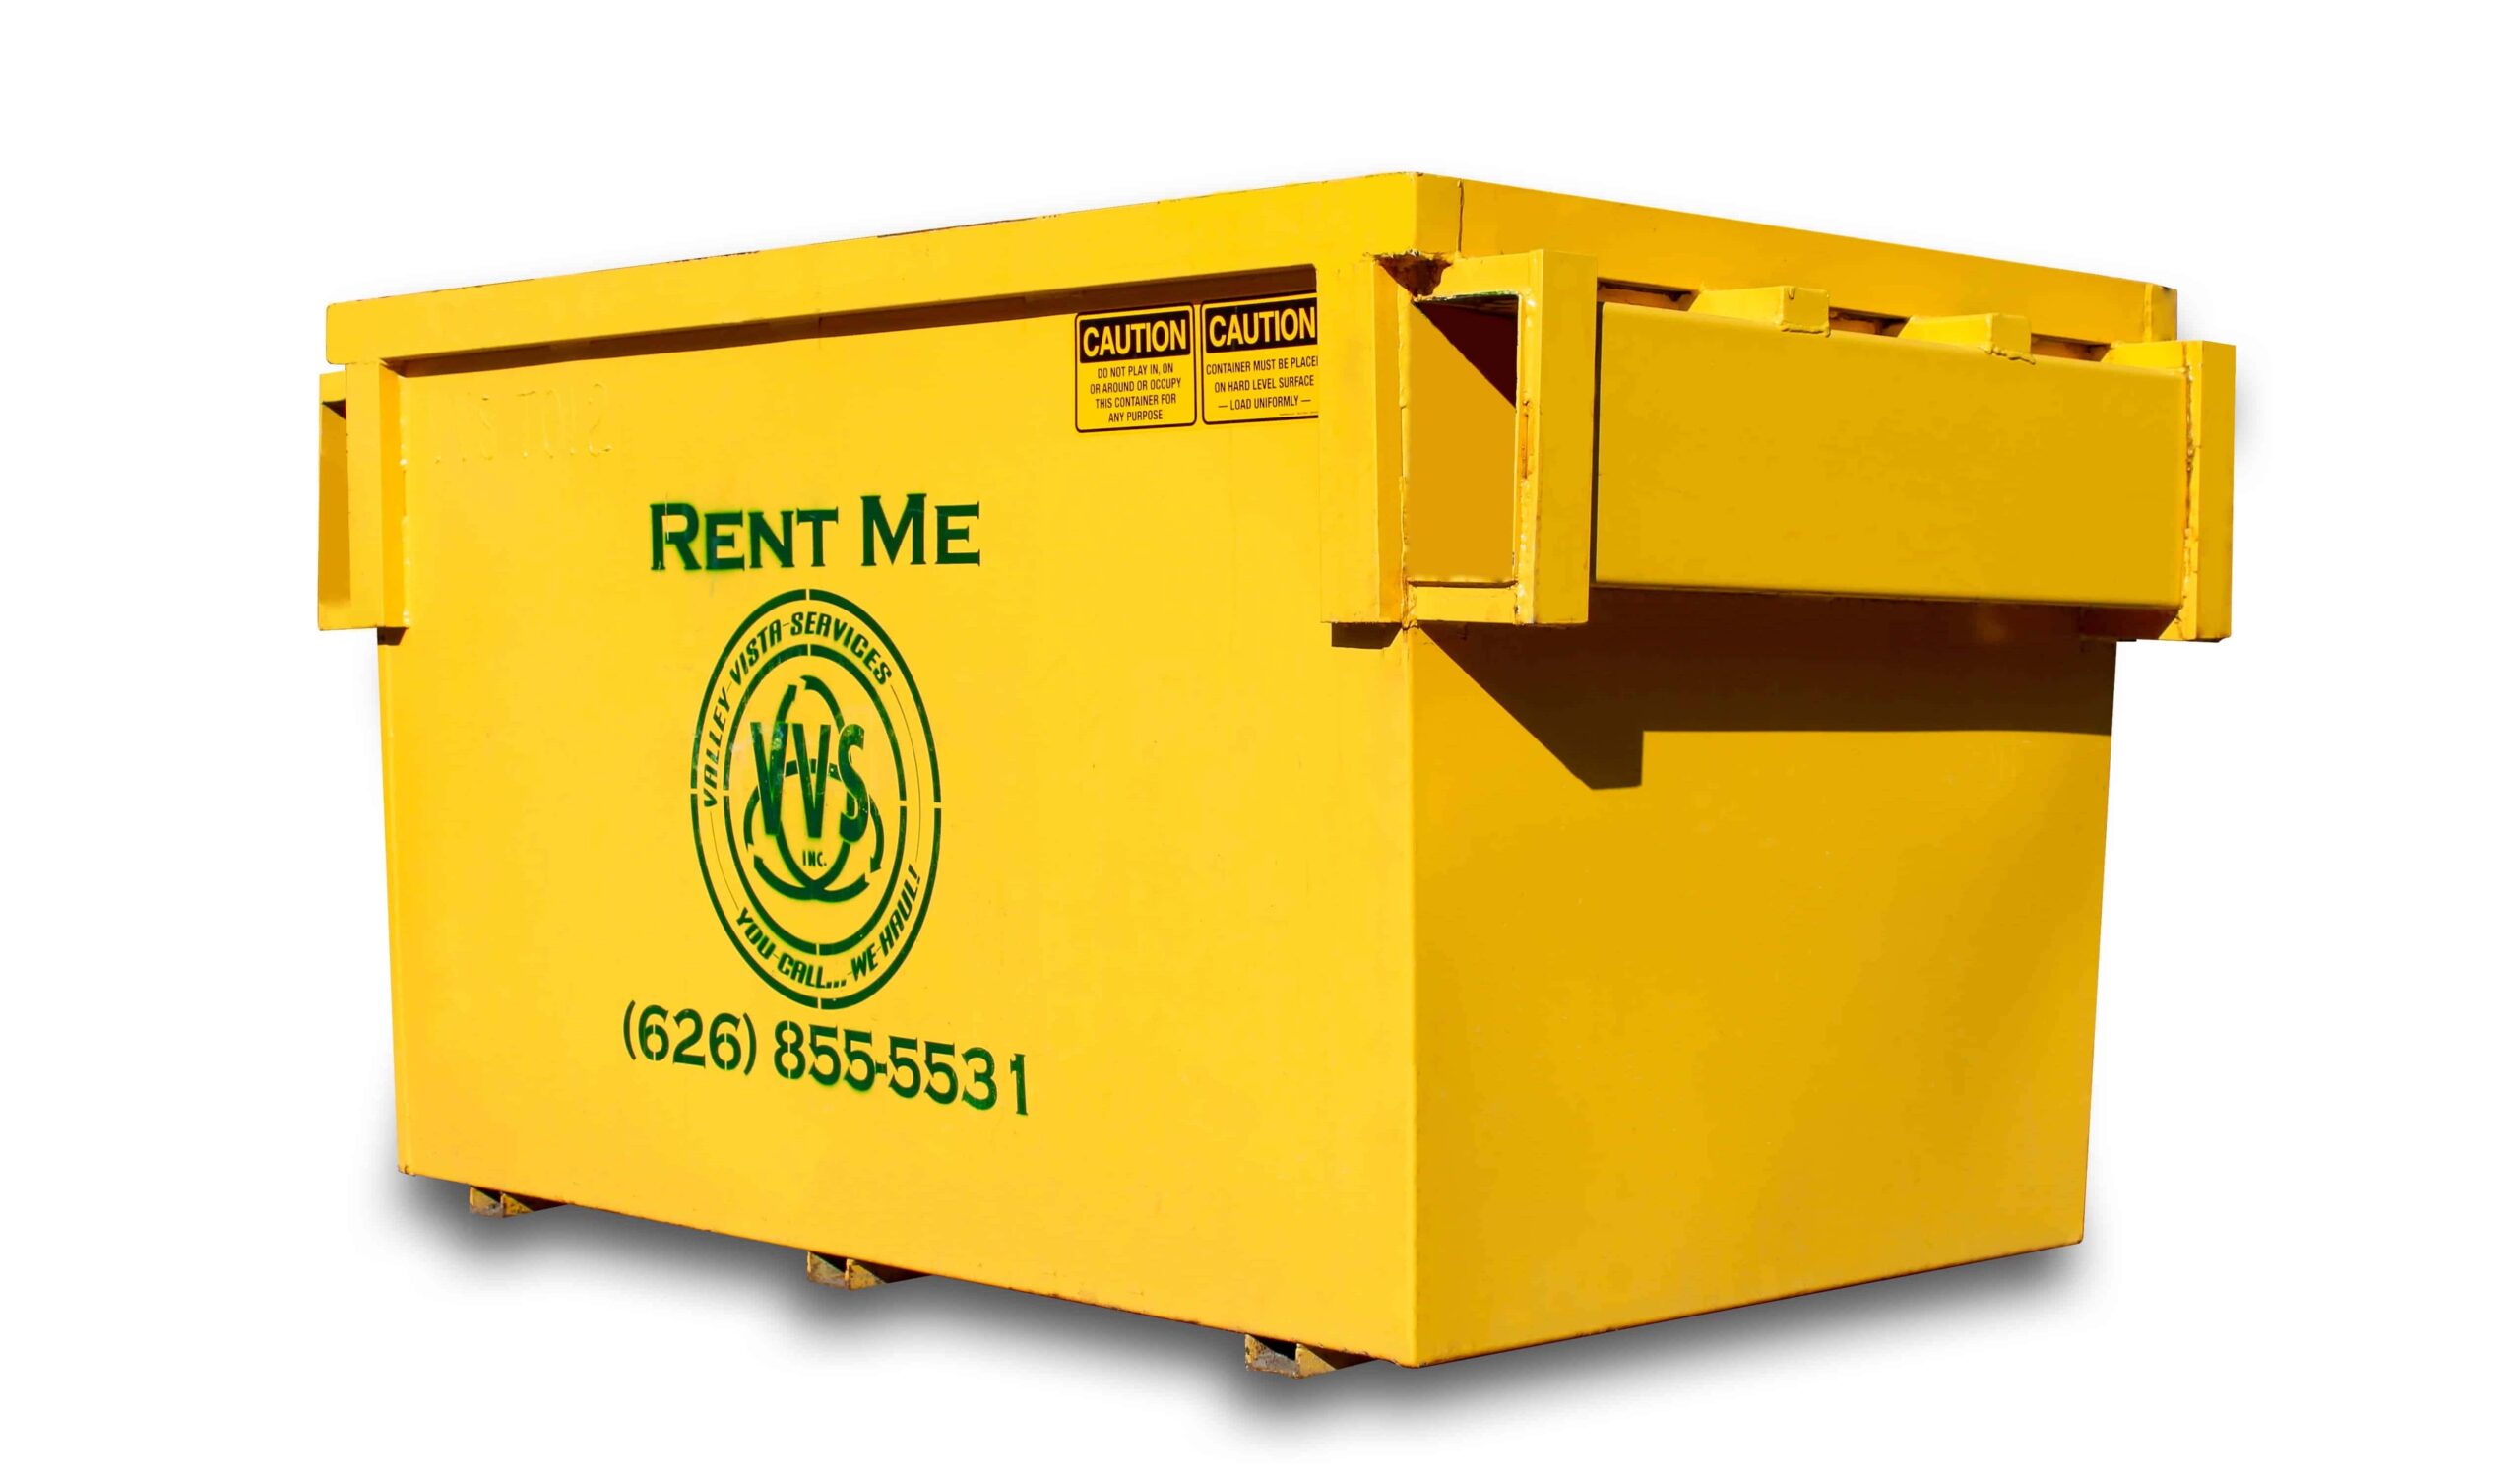 How Much Does It Cost To Hire A Waste Management Dumpster Rental?